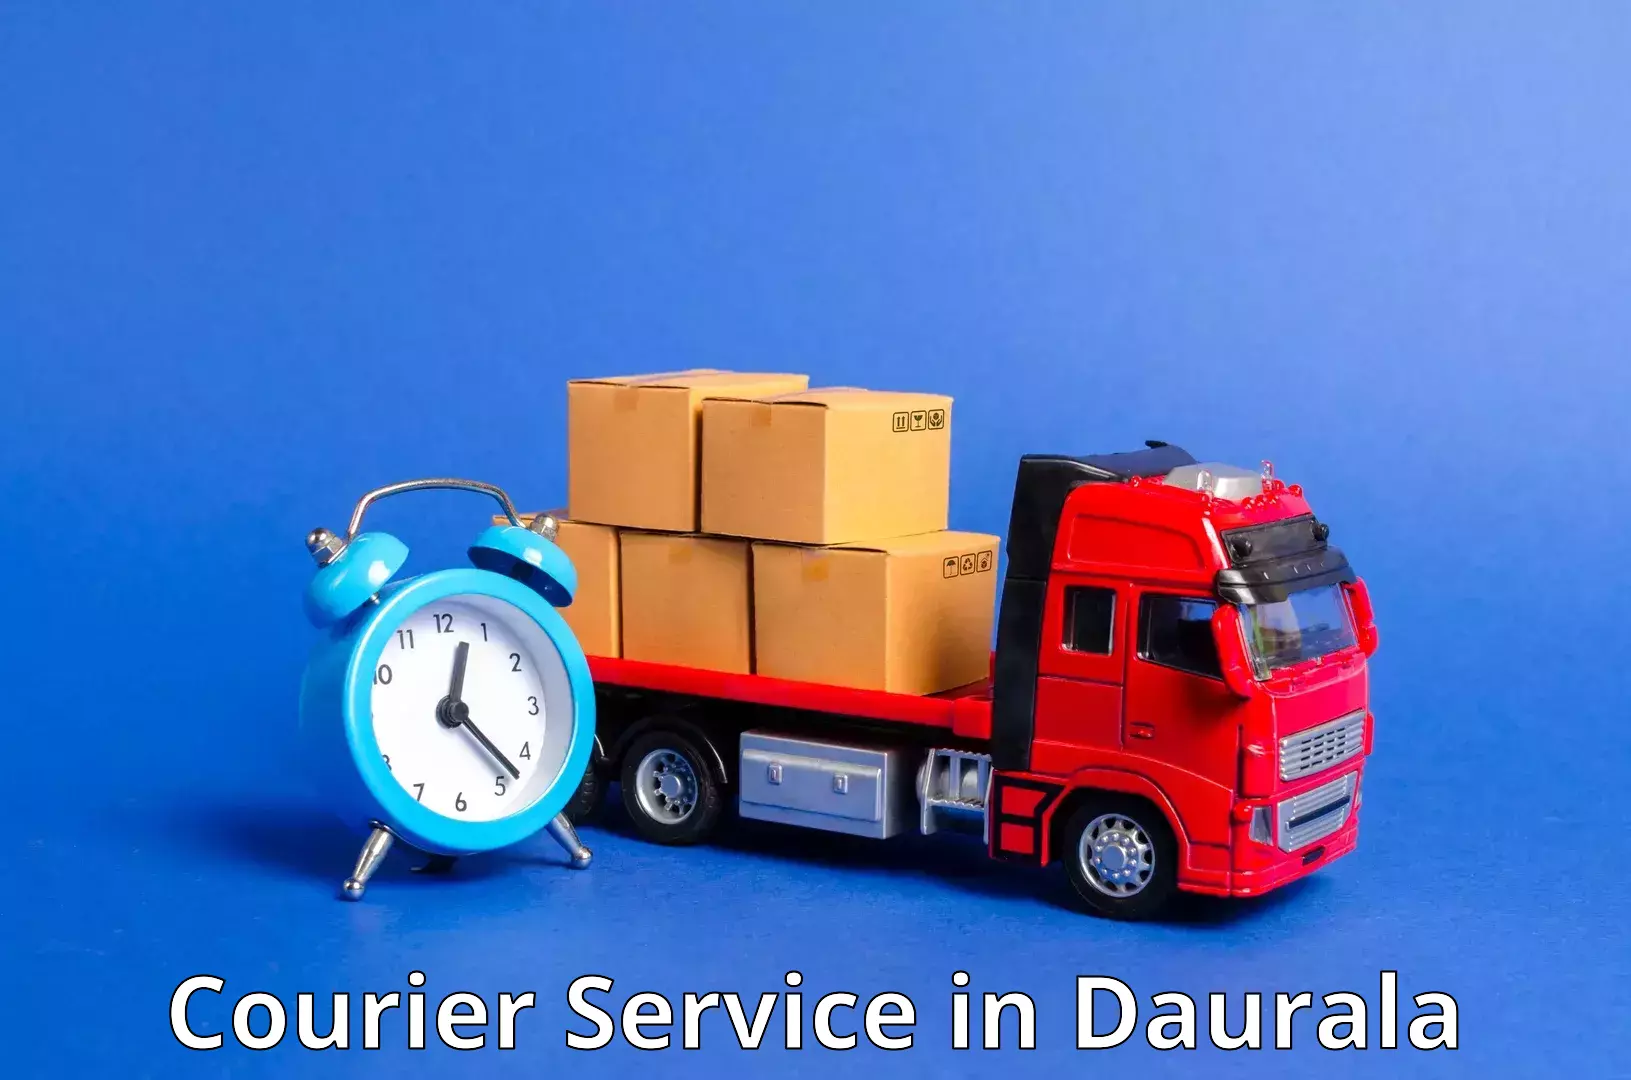 Small business couriers in Daurala